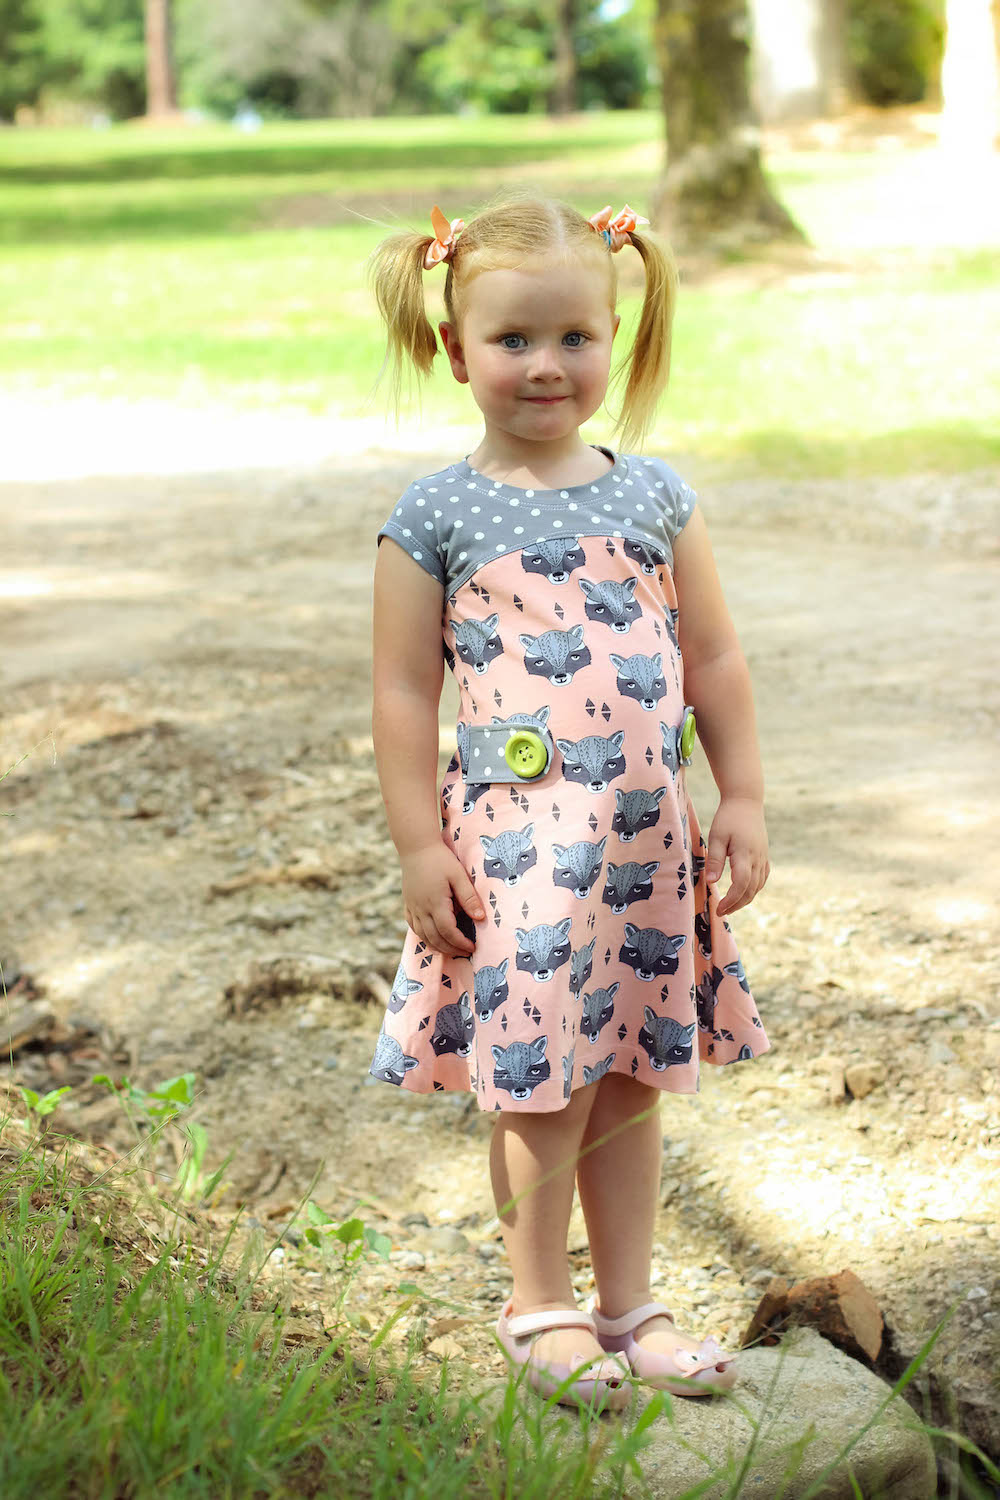 Nivalis Tunic and Dress by Sofilantjes Patterns — Pattern Revolution